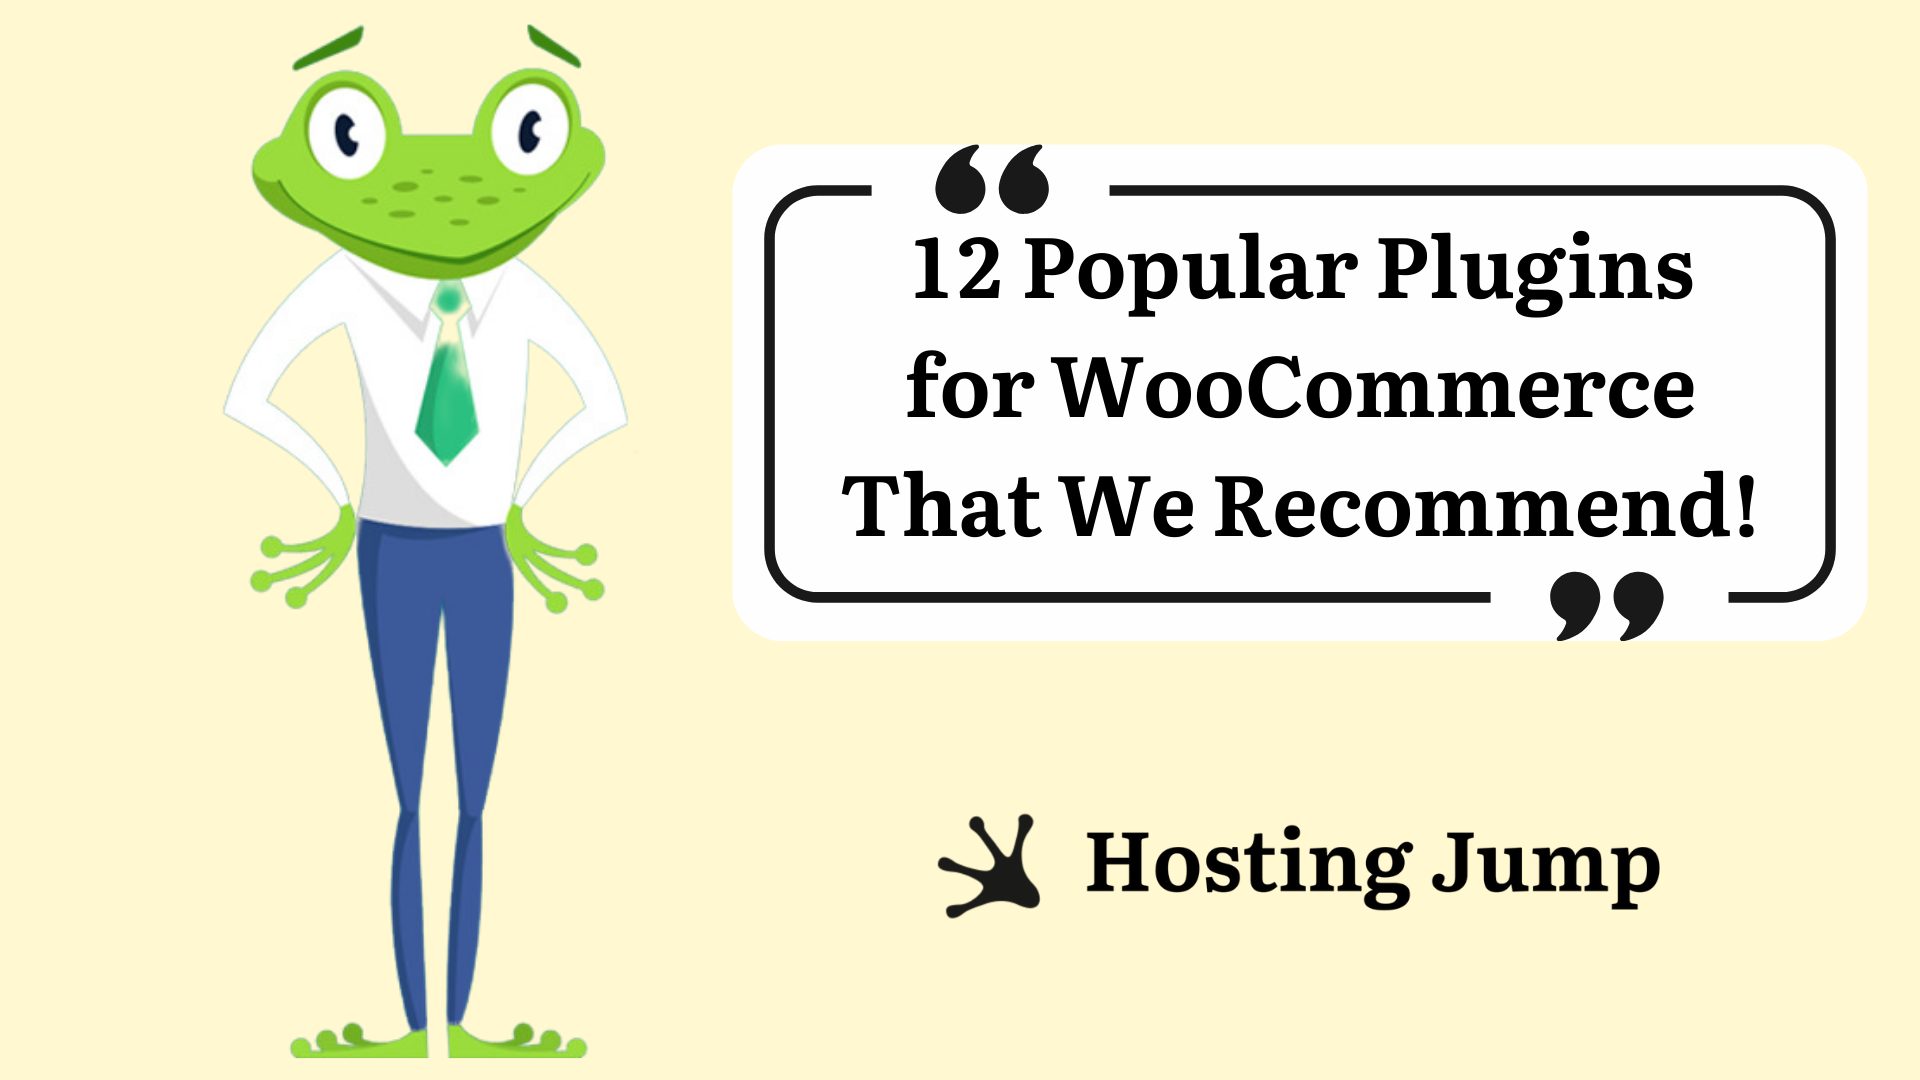 12 Popular Plugins for WooCommerce That We Recommend!